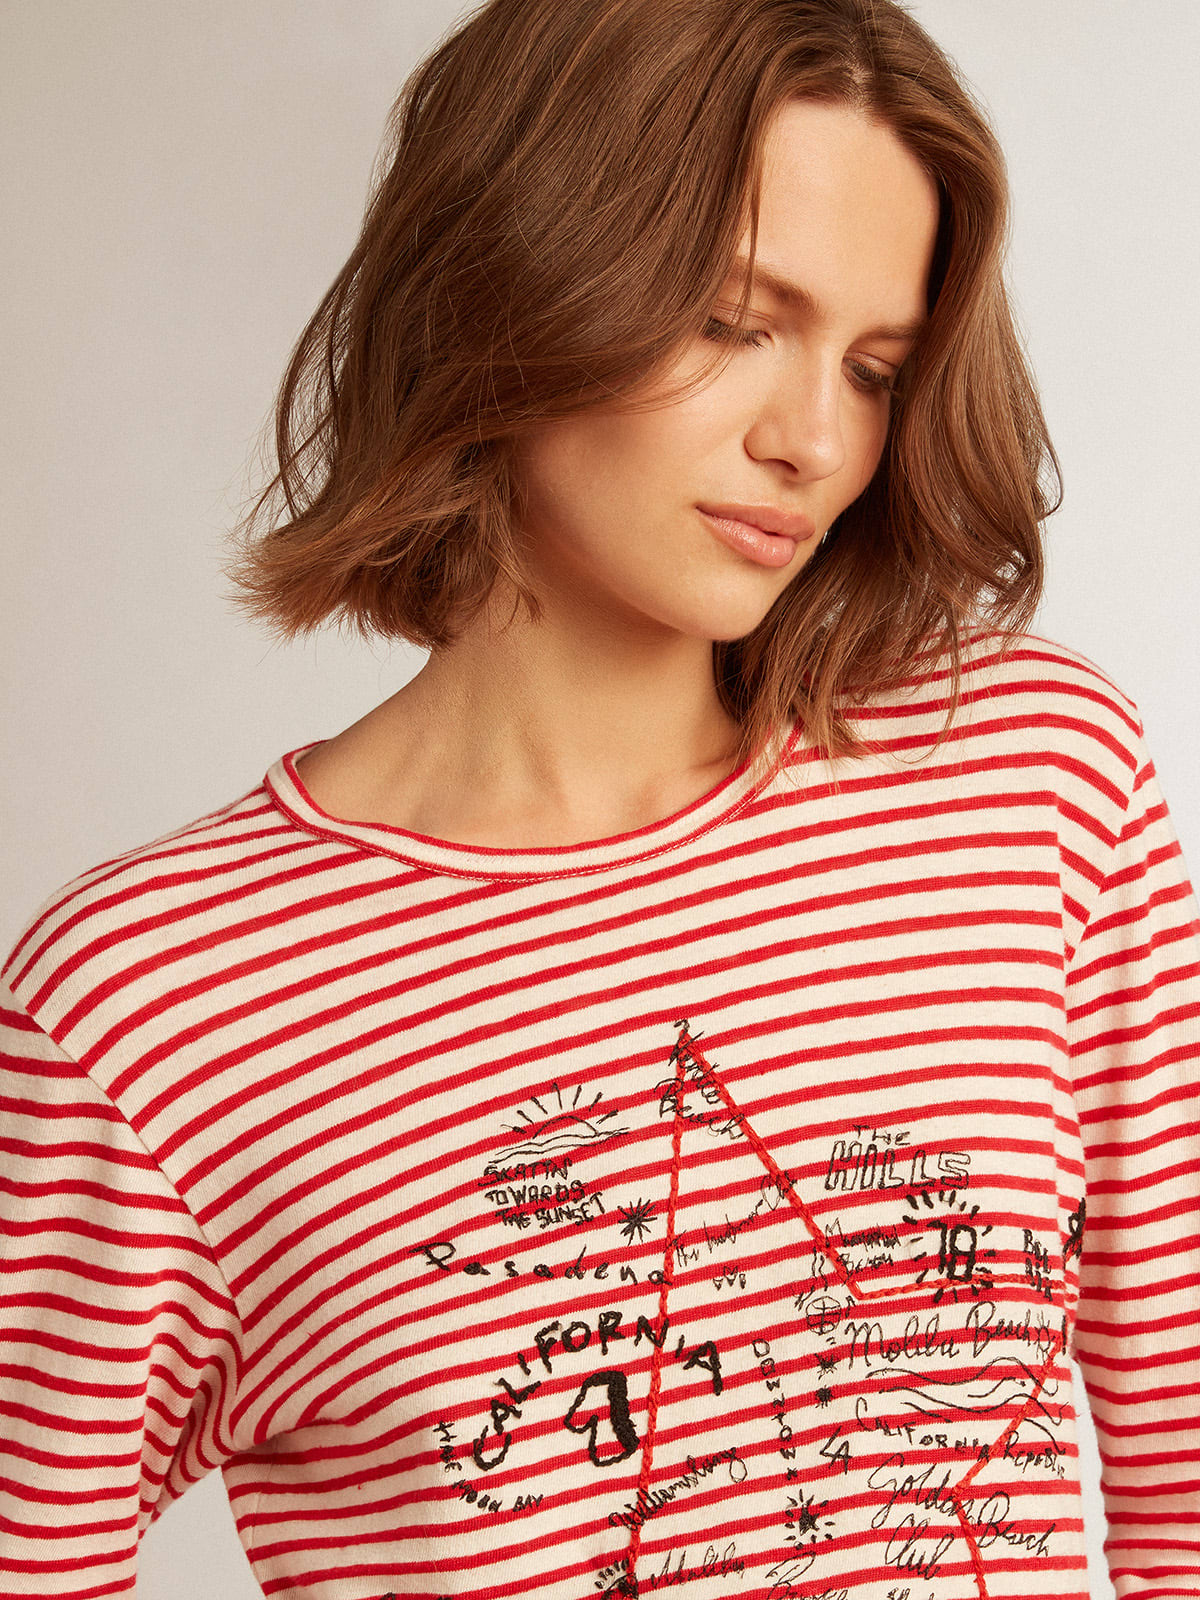 Golden Goose - Women's T-shirt with white and red stripes and embroidery on the front in 